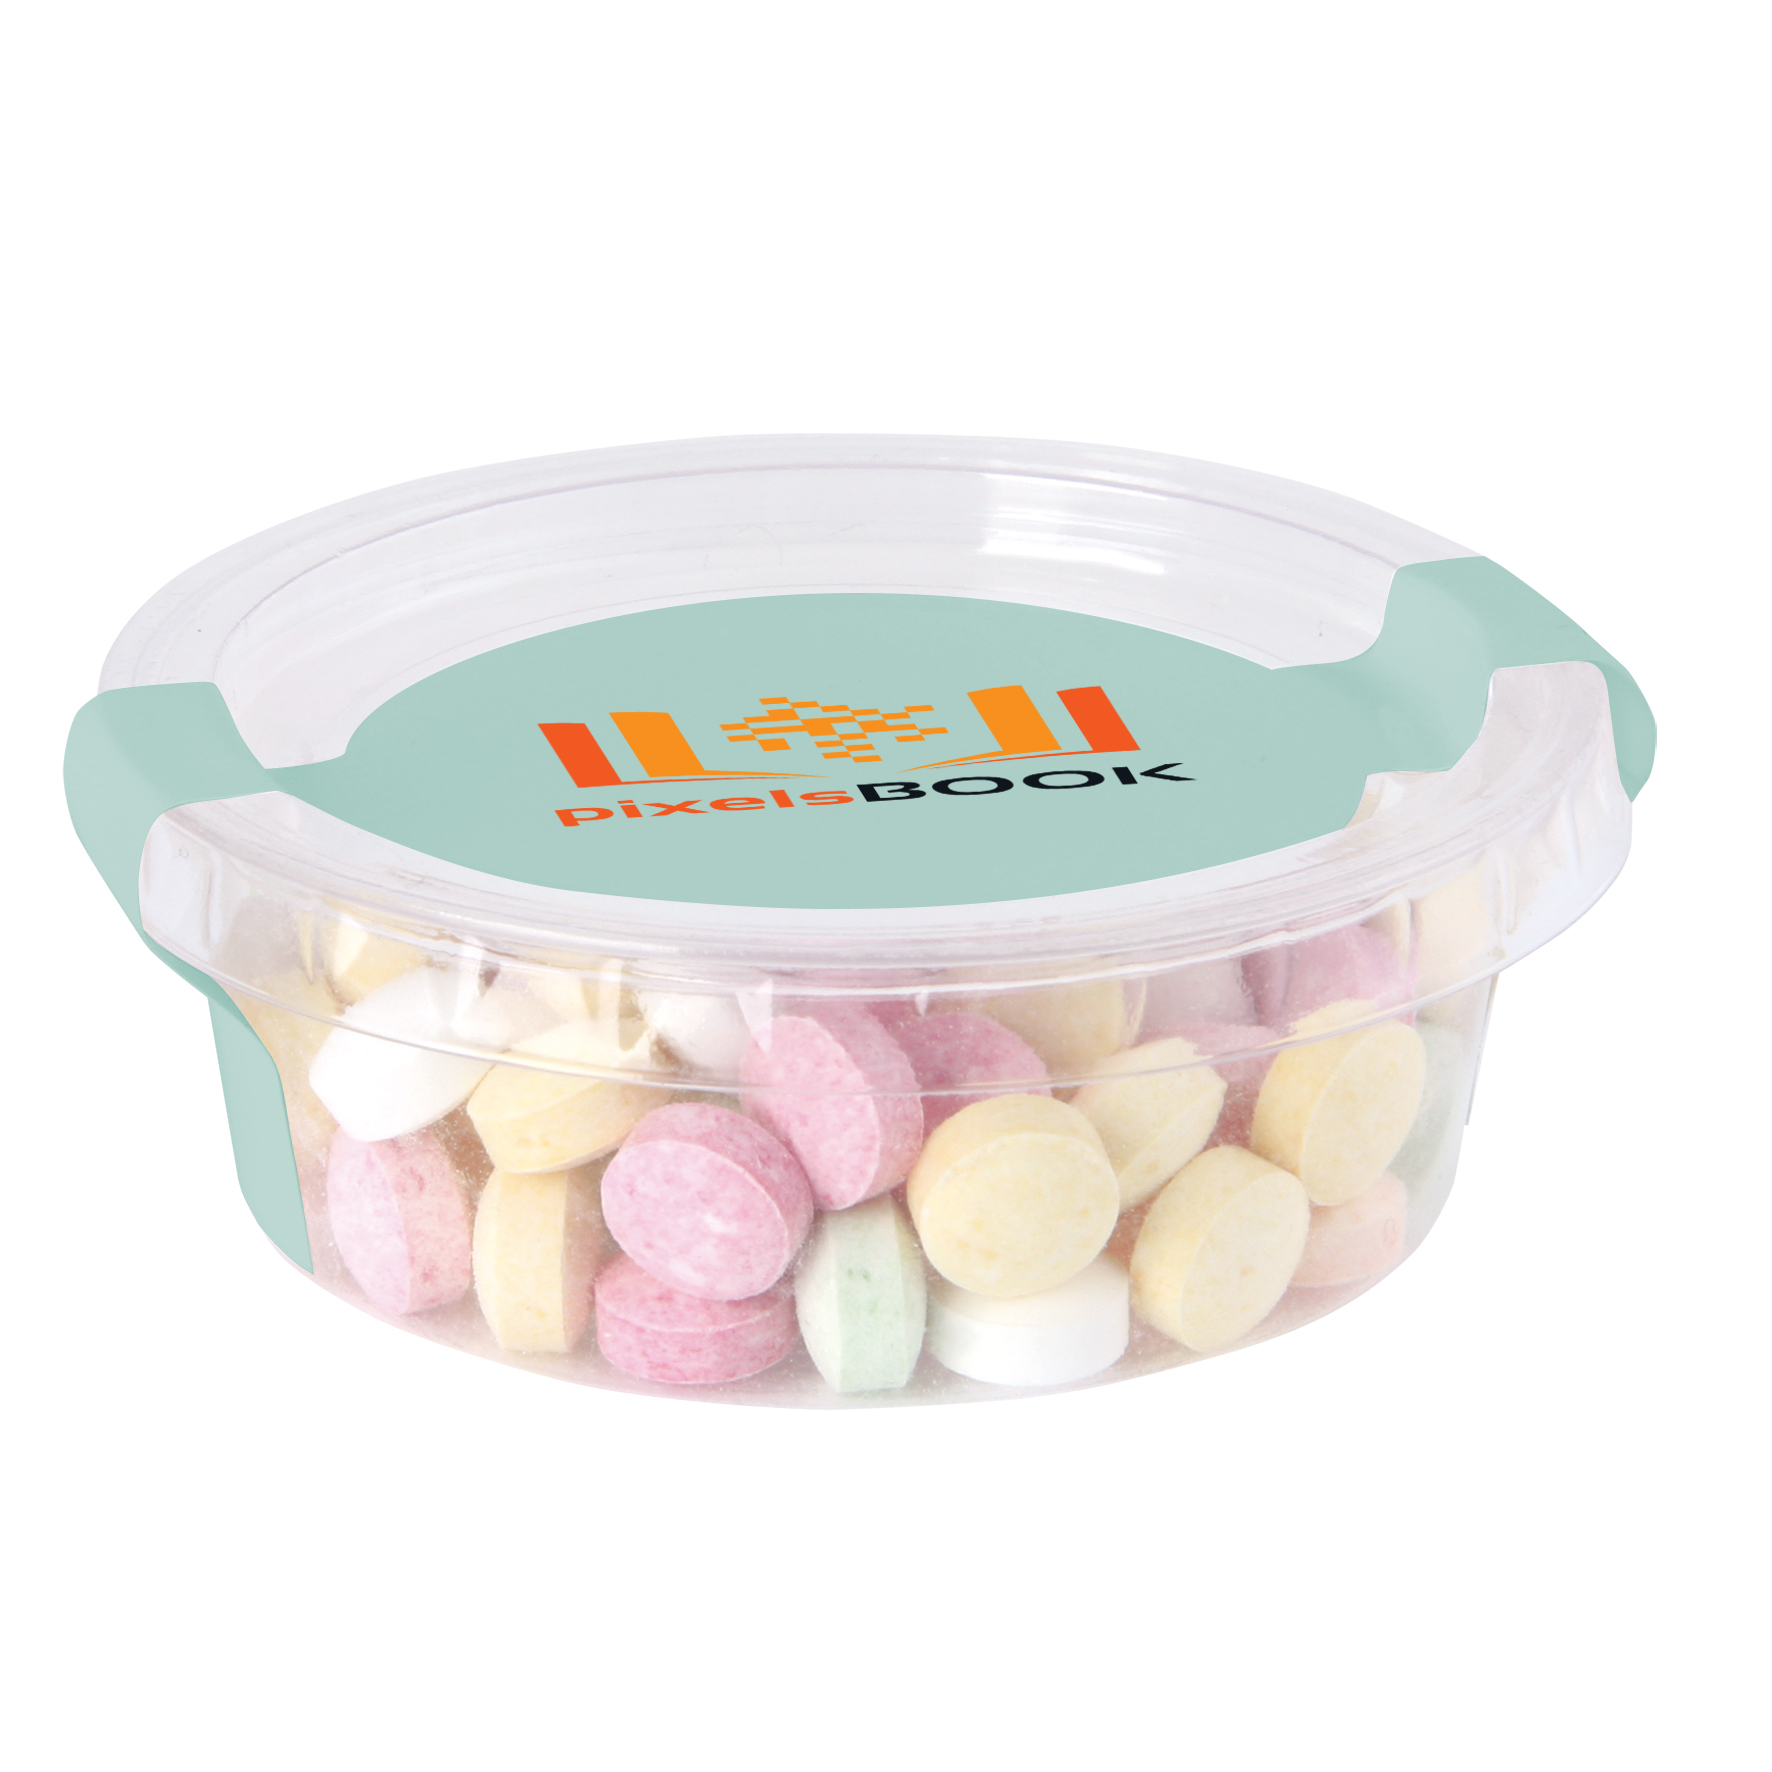 c 0639fs 00 09 - 150gr Bag with a card base and printed header board filled with jelly beans